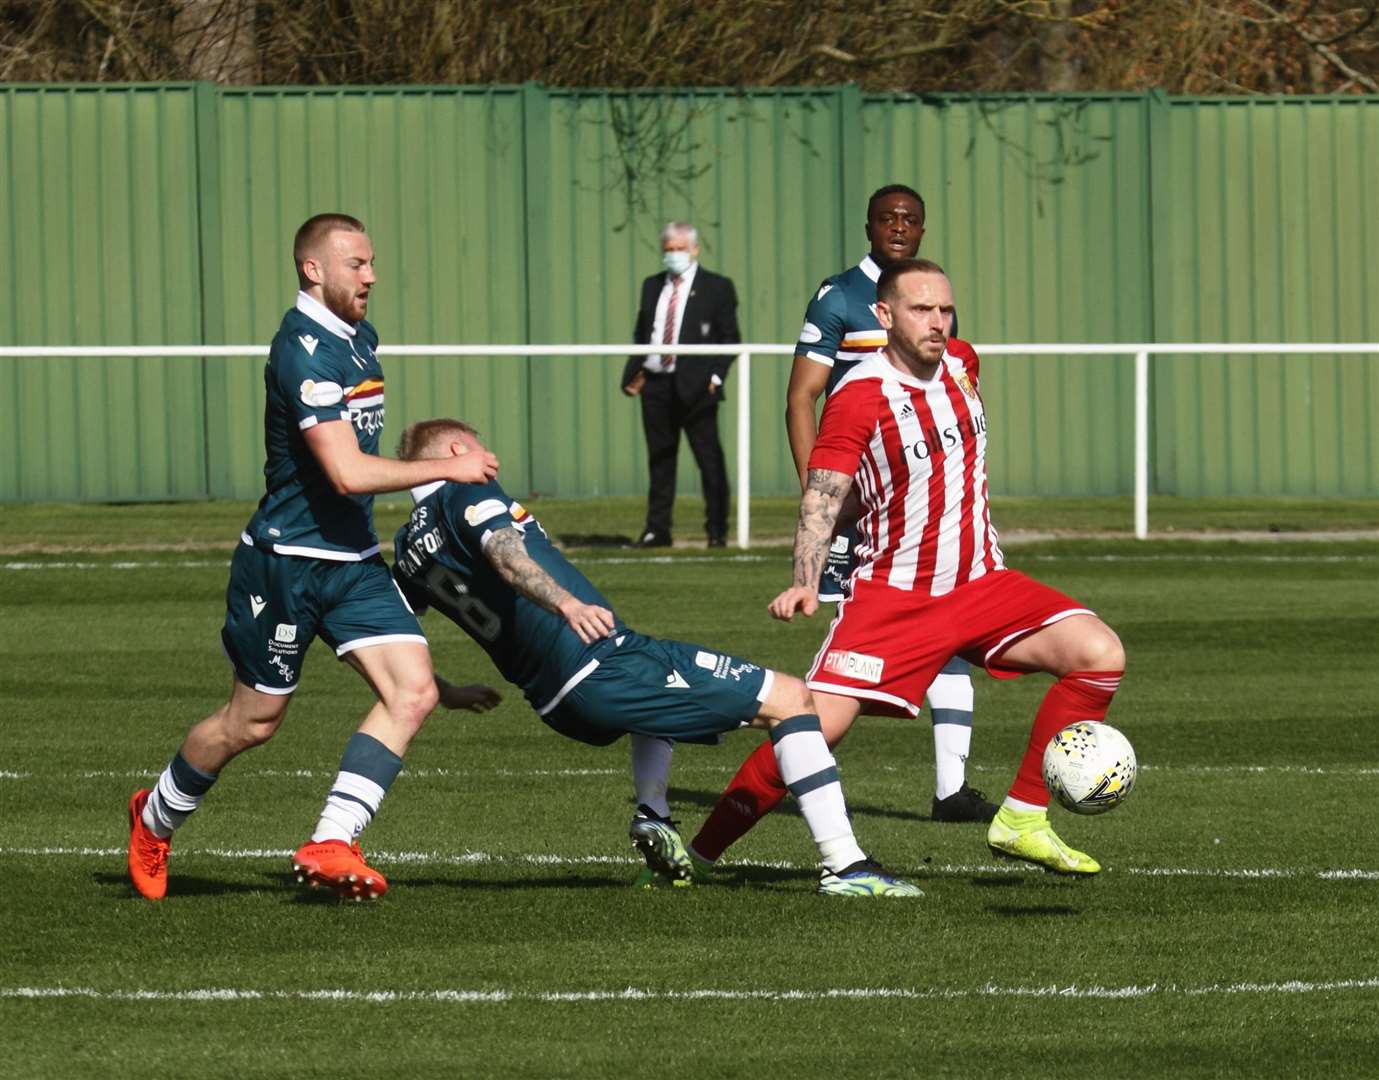 Jonny Smith has been on hot scoring form for Formartine United.